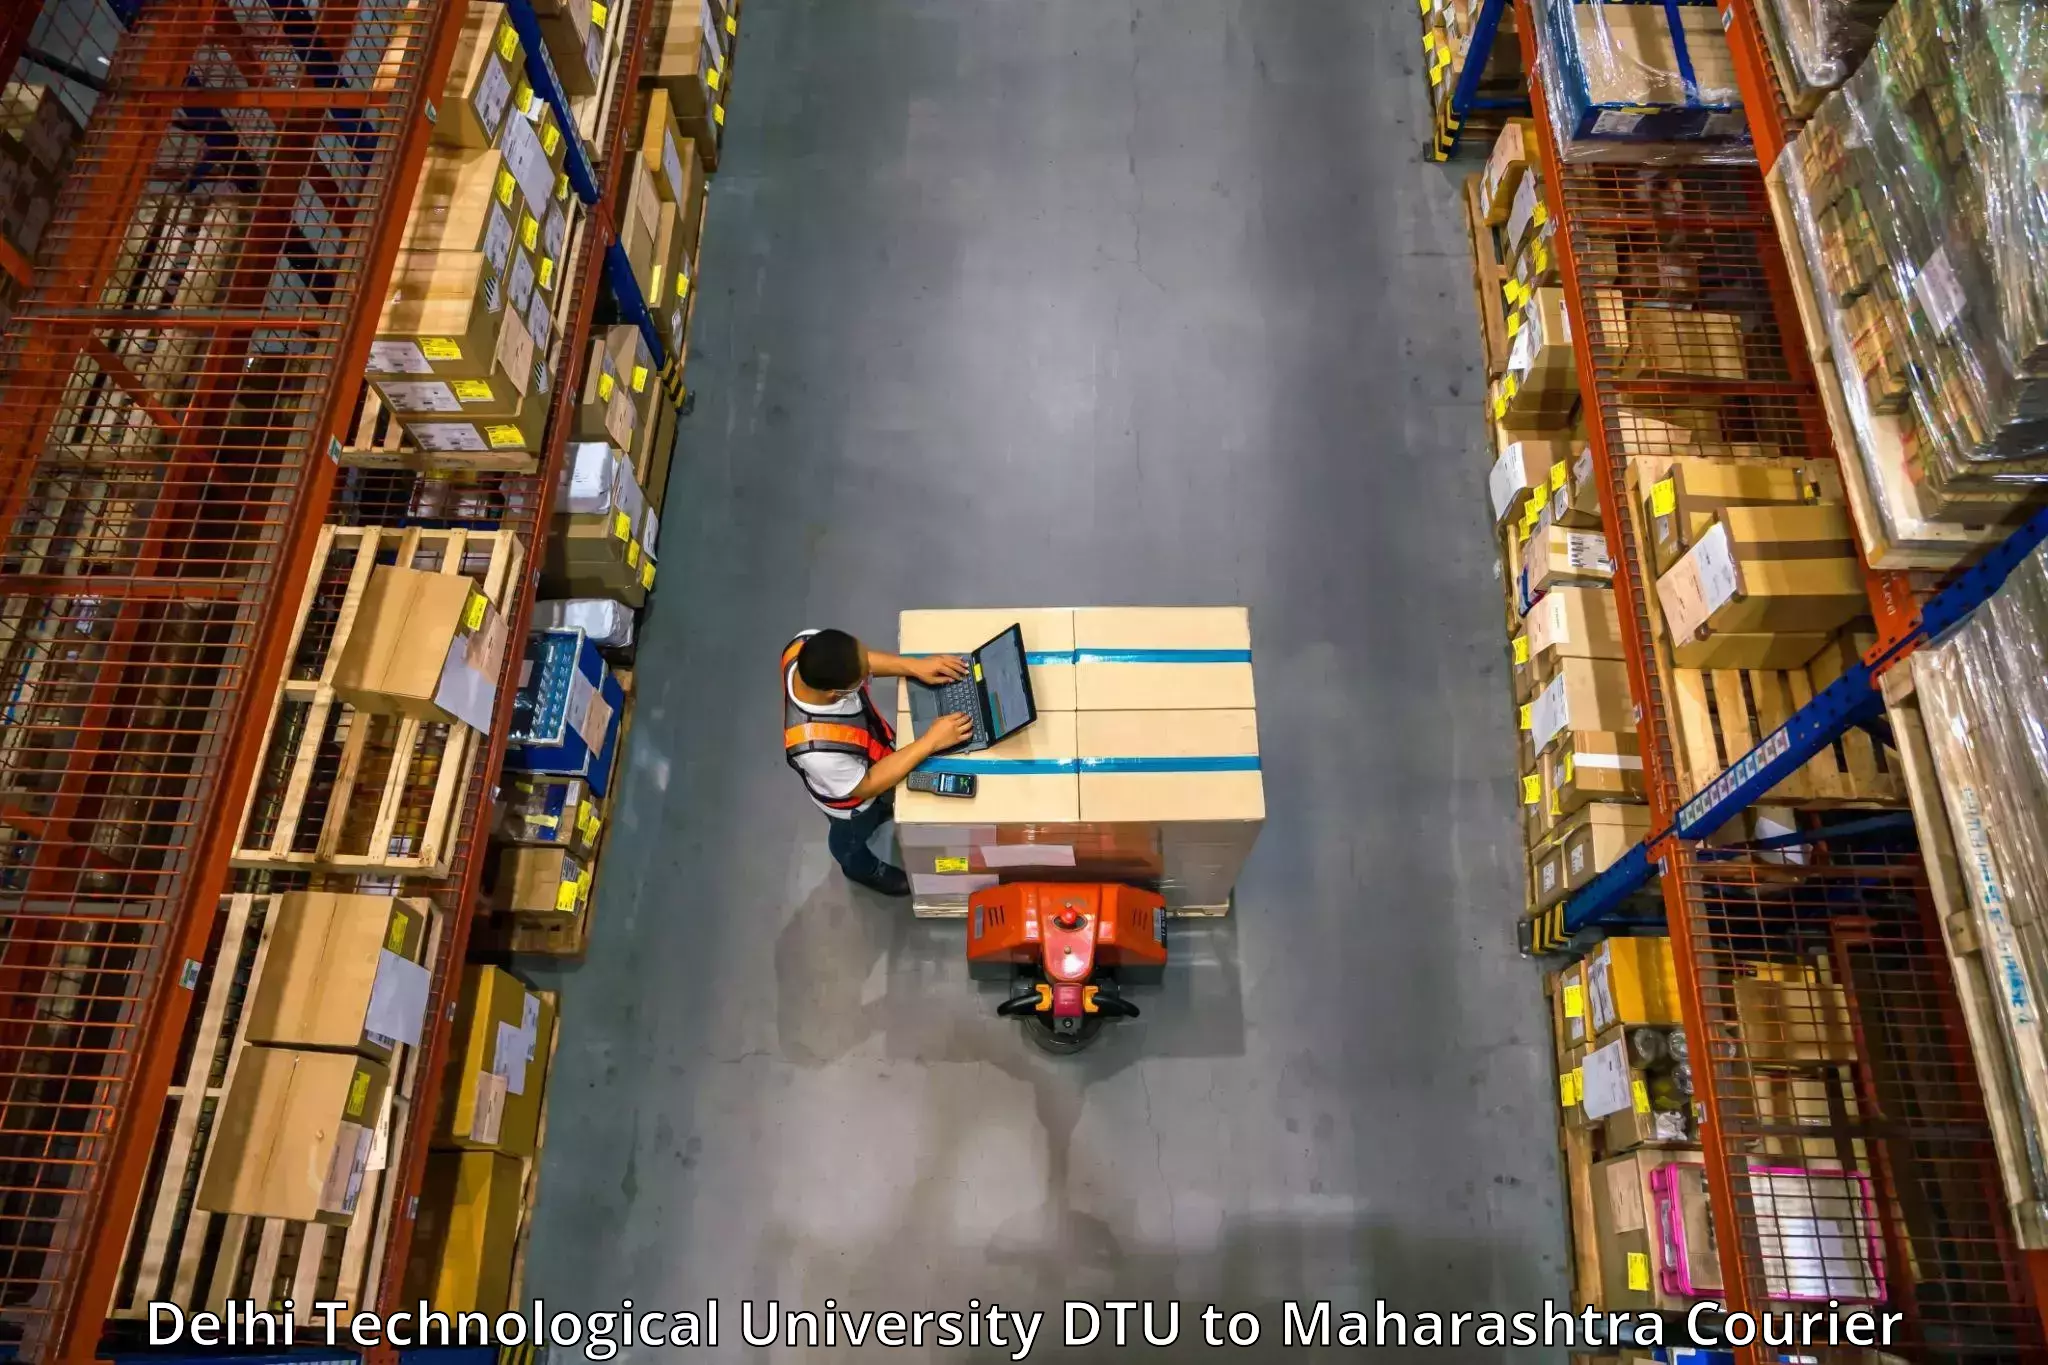 Quality moving and storage in Delhi Technological University DTU to Gadchiroli